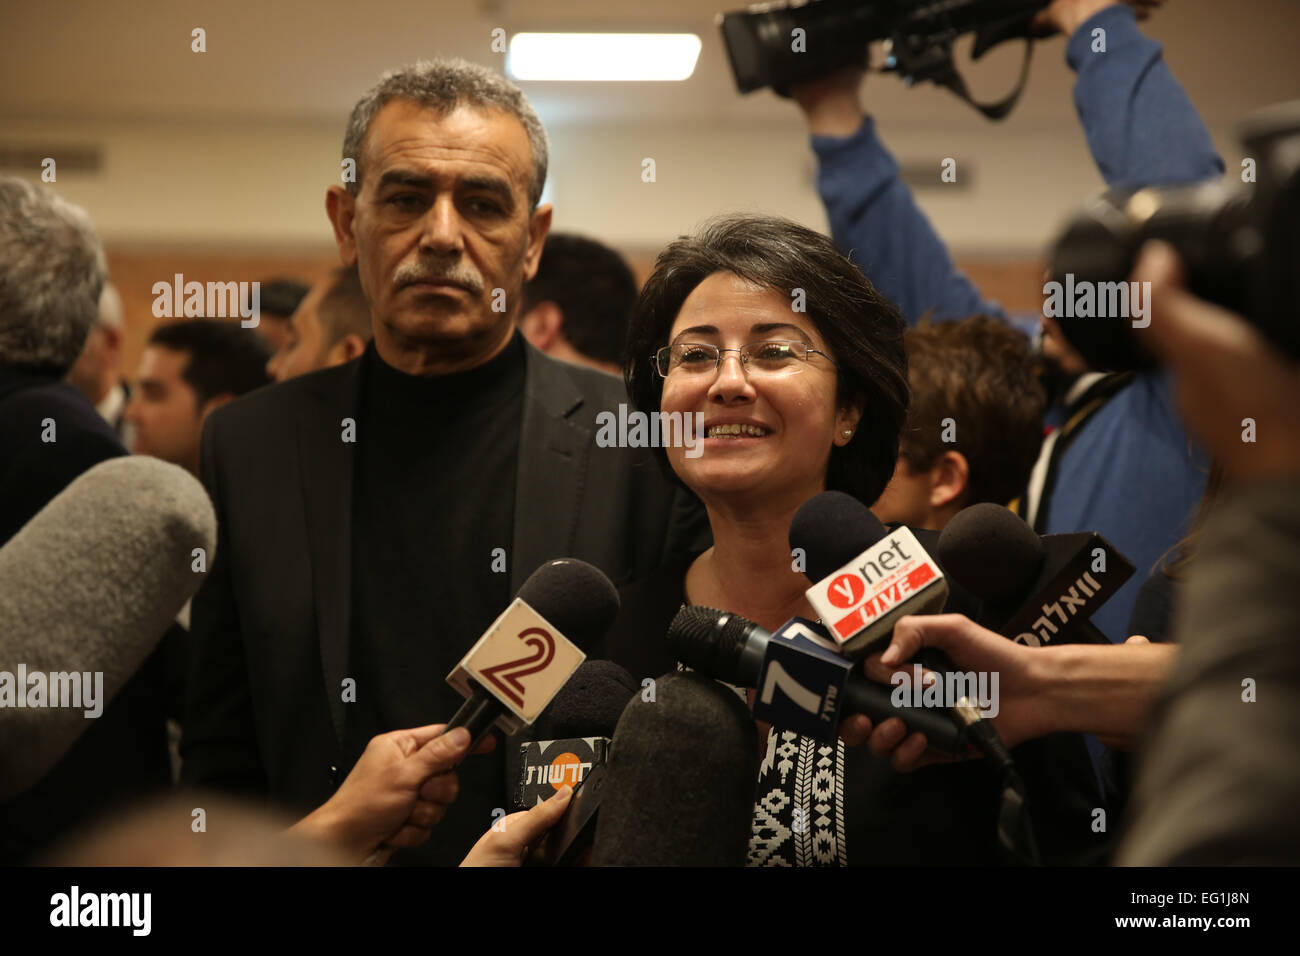 Jerusalem. 12th Feb, 2015. Arab Israeli lawmaker Hanin Zoabi (C) speaks to the press after a vote to disqualify her from running for Knesset elections at the Israeli Central Elections Committee in the Israeli Knesset (parliament) in Jerusalem, on Feb. 12, 2015. The Israeli Central Elections Committee decided on Thursday to ban an Arab lawmaker and a far right-wing activist from running in the upcoming elections due to their controversial public remarks. © JINI/Xinhua/Alamy Live News Stock Photo